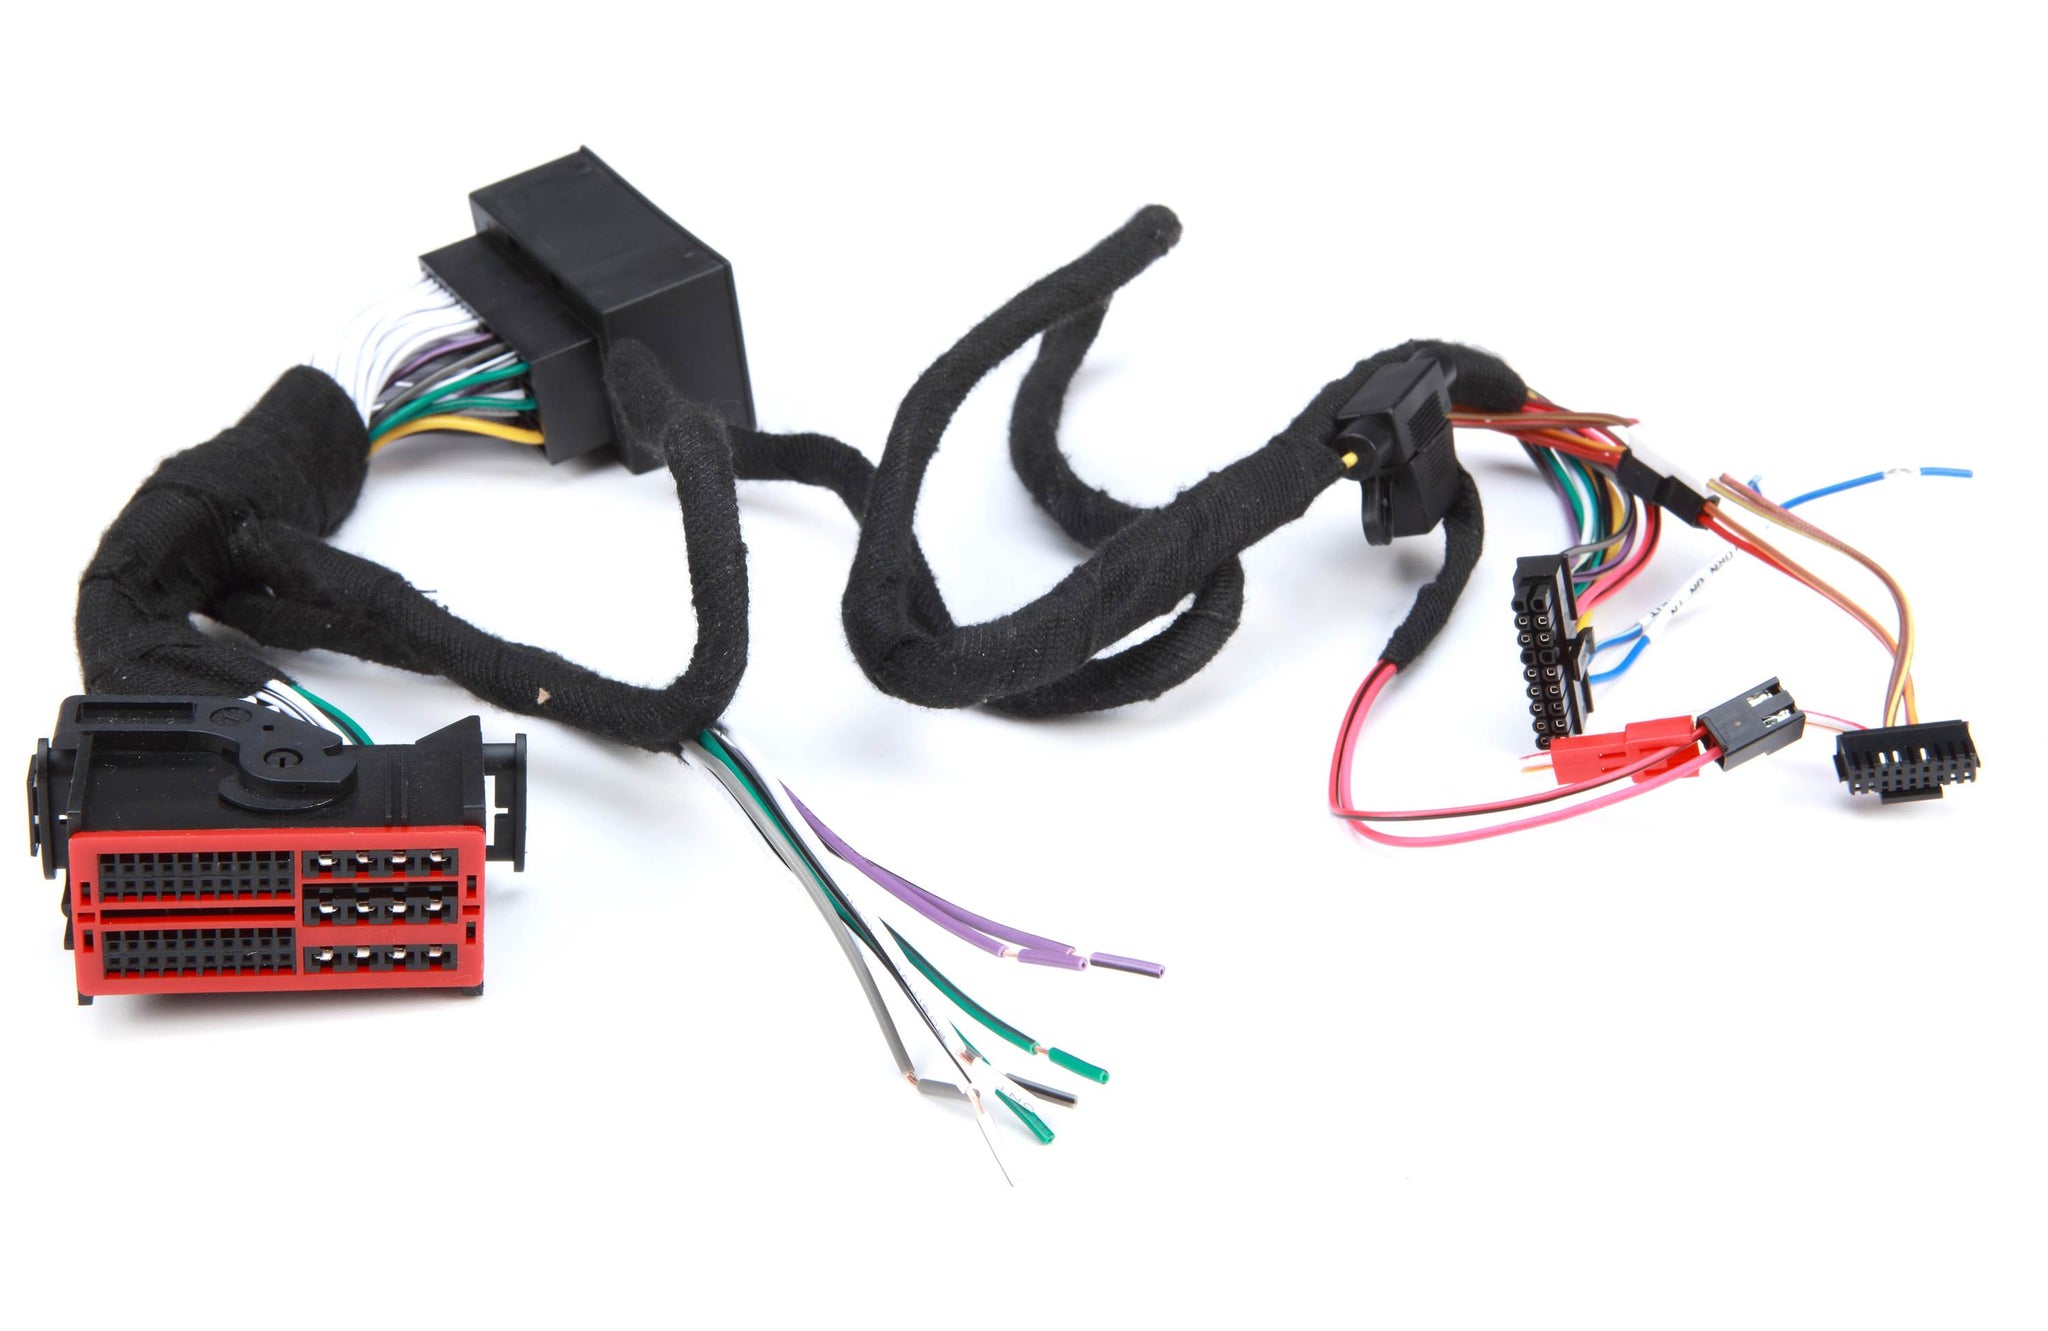 iDatalink HRN-DSP-CH3 T-harness for adding a Rockford Fosgate DSR1 processor to select 2013-up Chrysler-built vehicles without a factory amp